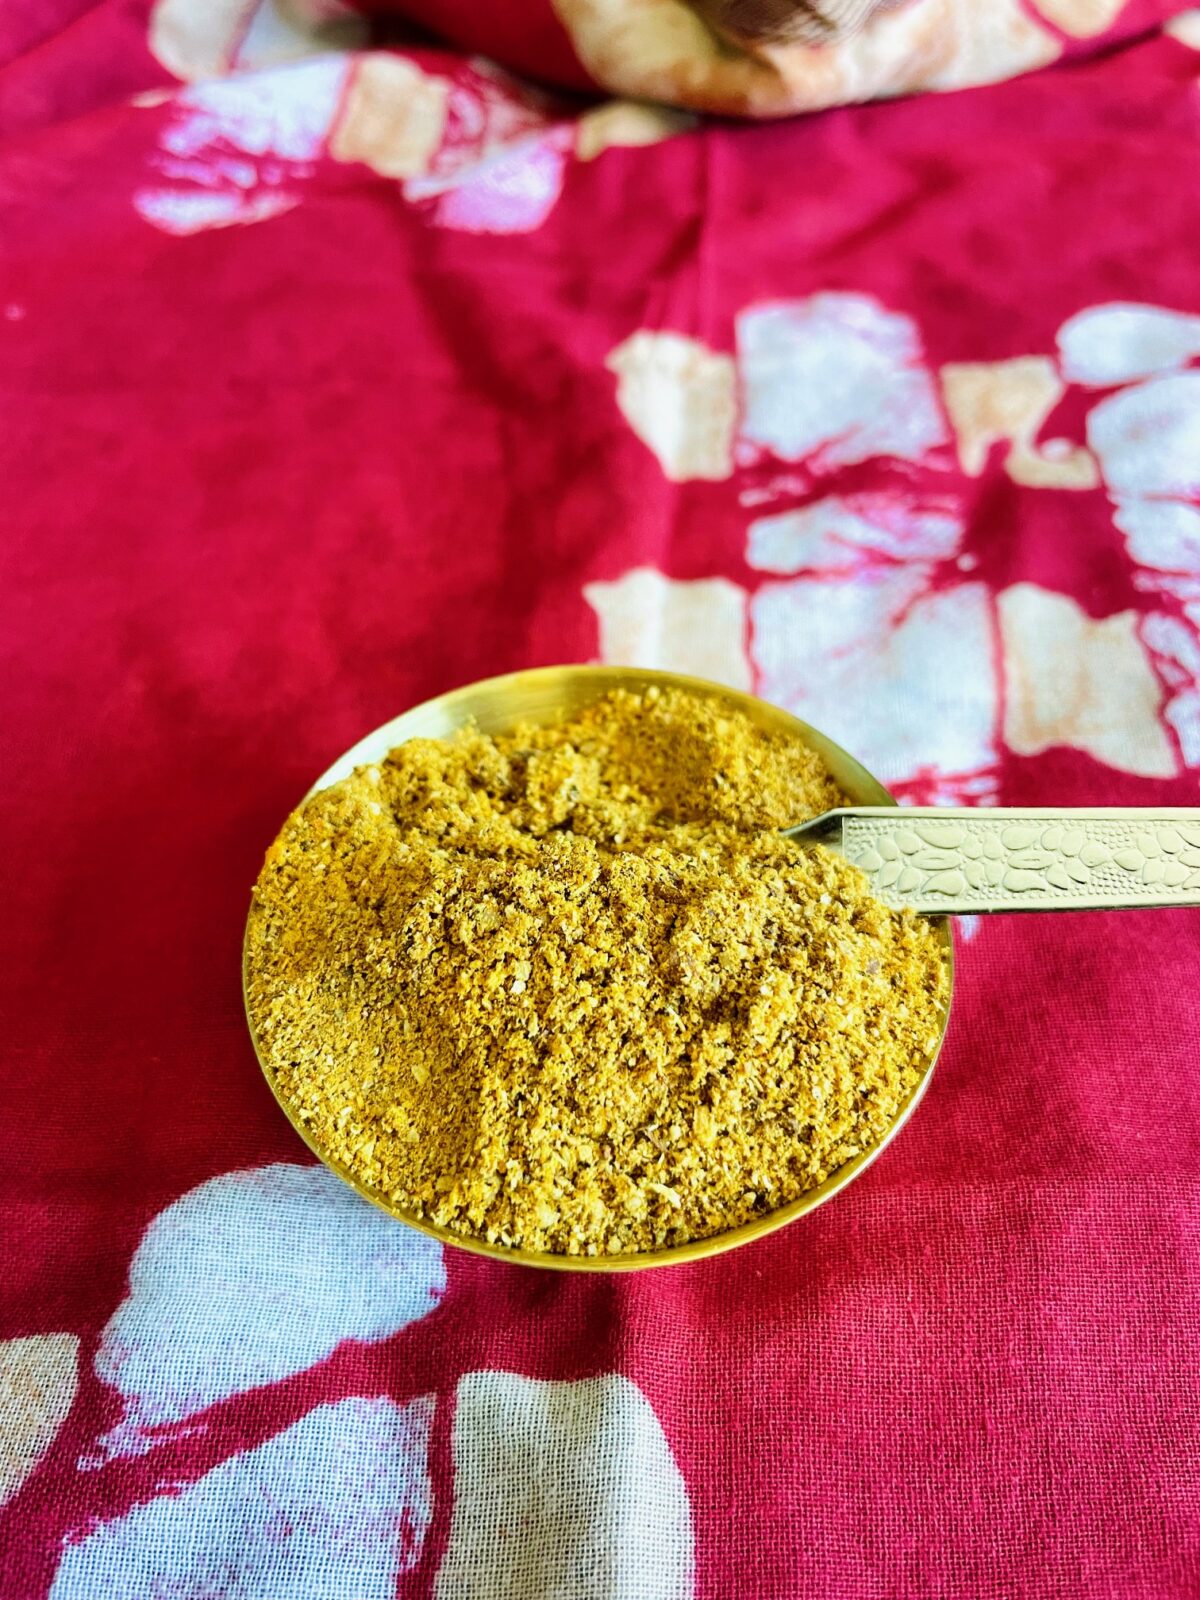 Basic Indian curry powder in a bowl with spoon.